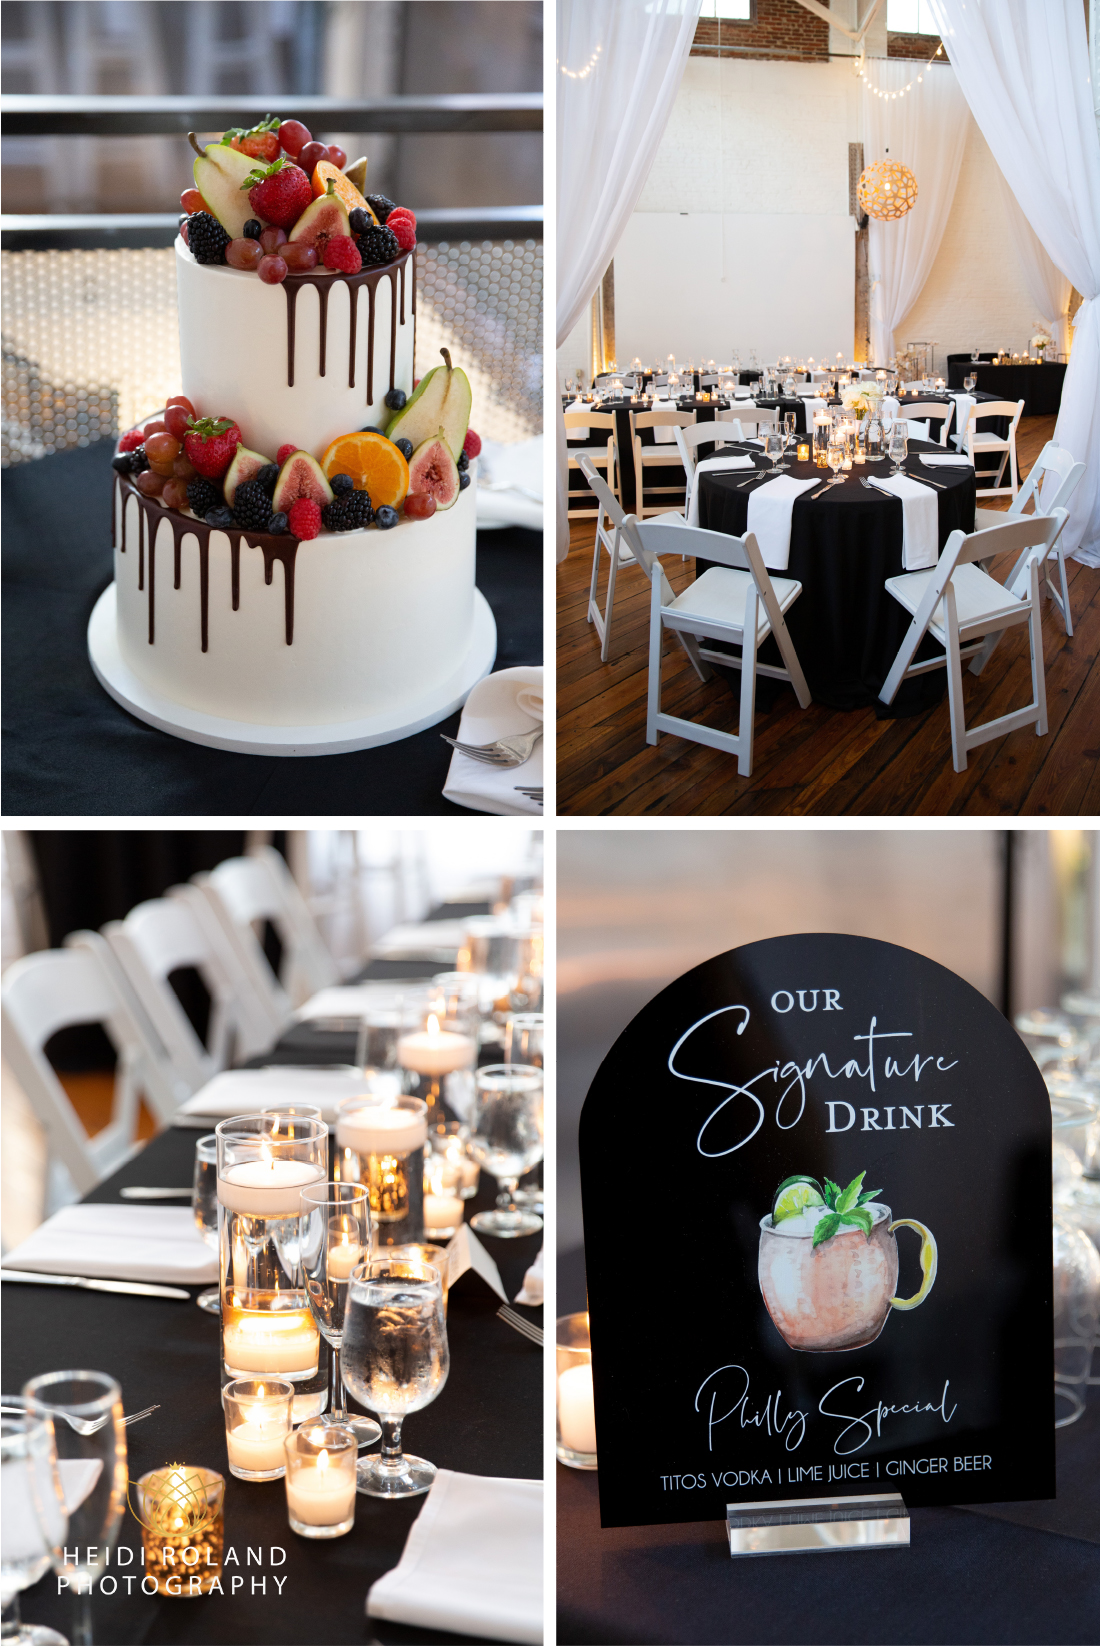 Detail of the reception at Power Plant Productions wedding. Wedding cake with fruits and chocolate and a philadelphia signature drink